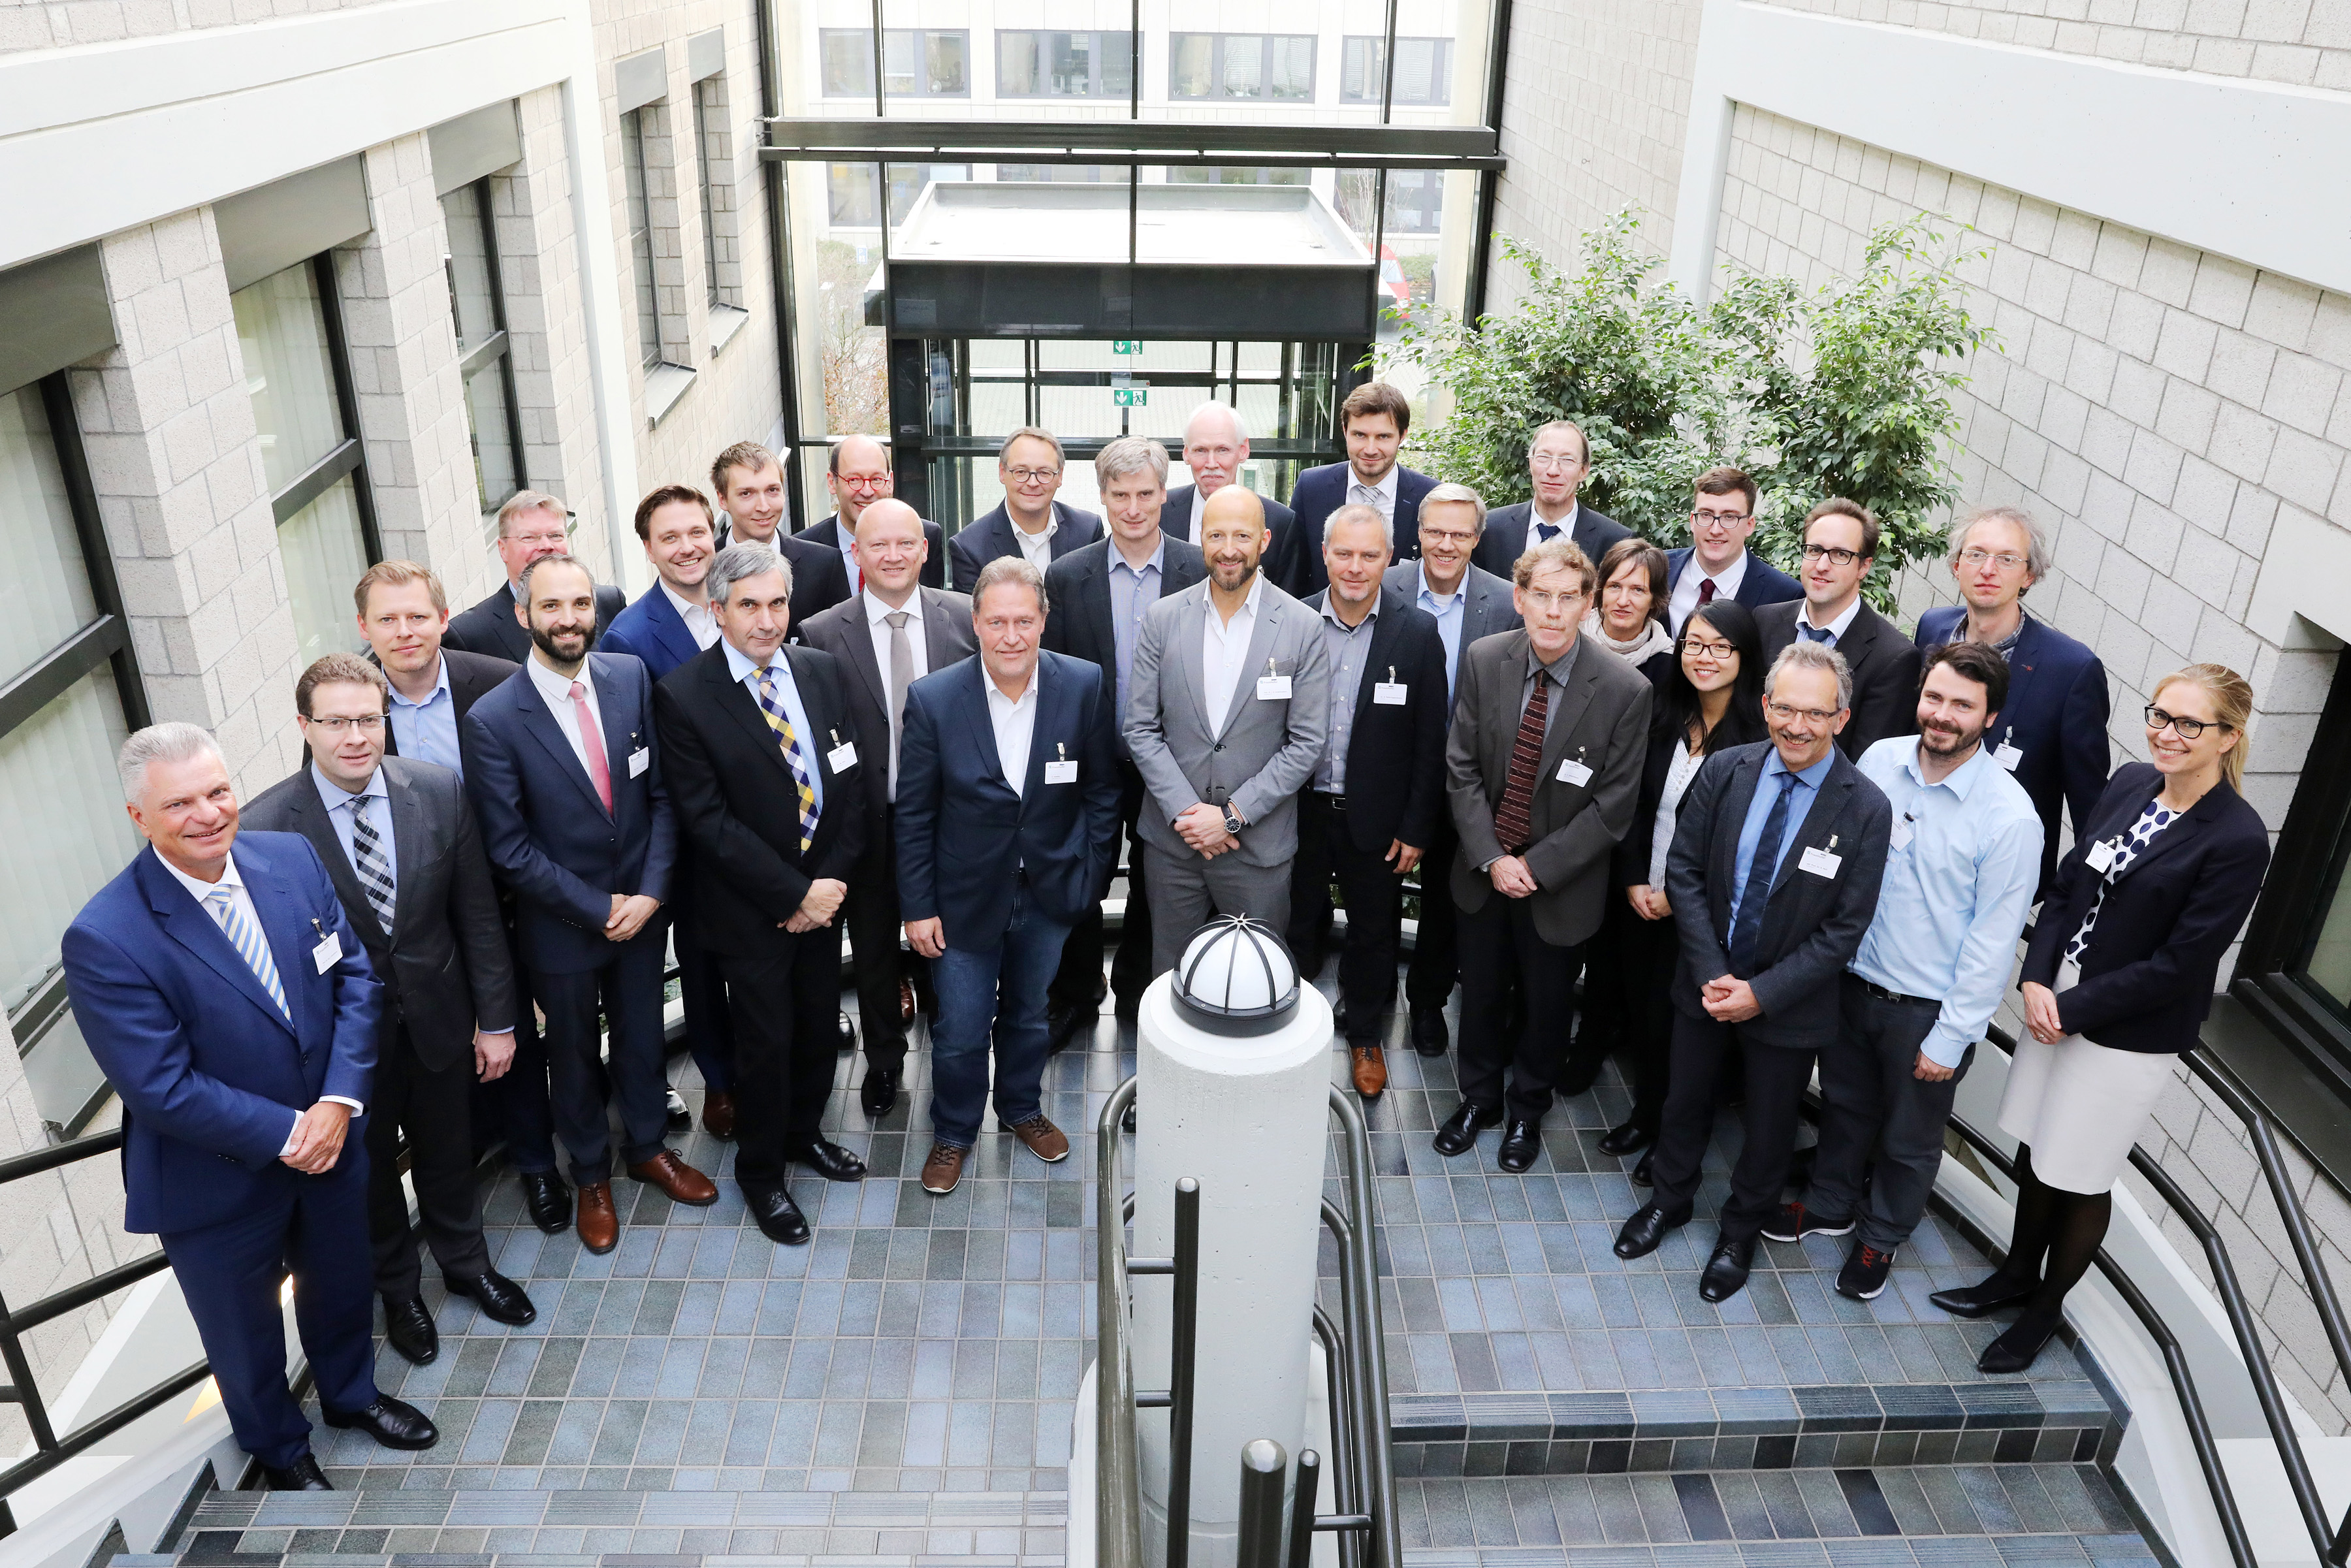 Image 1: Partners from industry and science met on Nov. 14, 2017 for the kick-off of the Fraunhofer futureAM lighthouse project in Aachen.